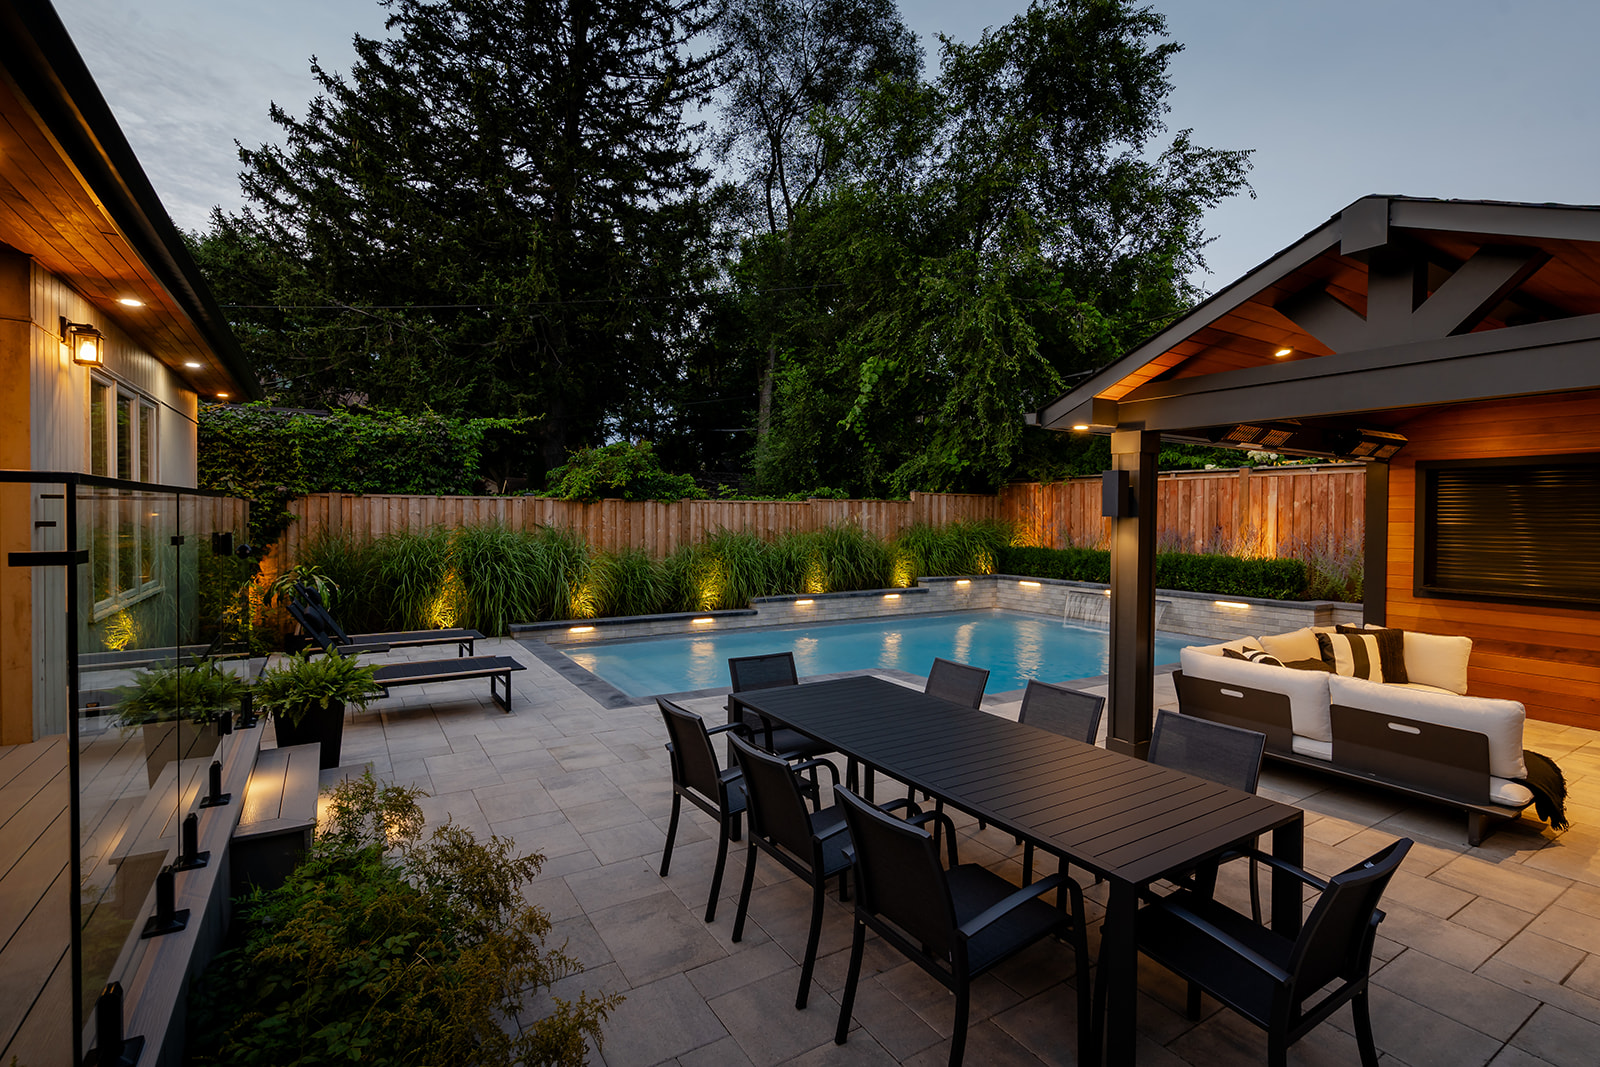 An outdoor patio set with an inground pool in the background.